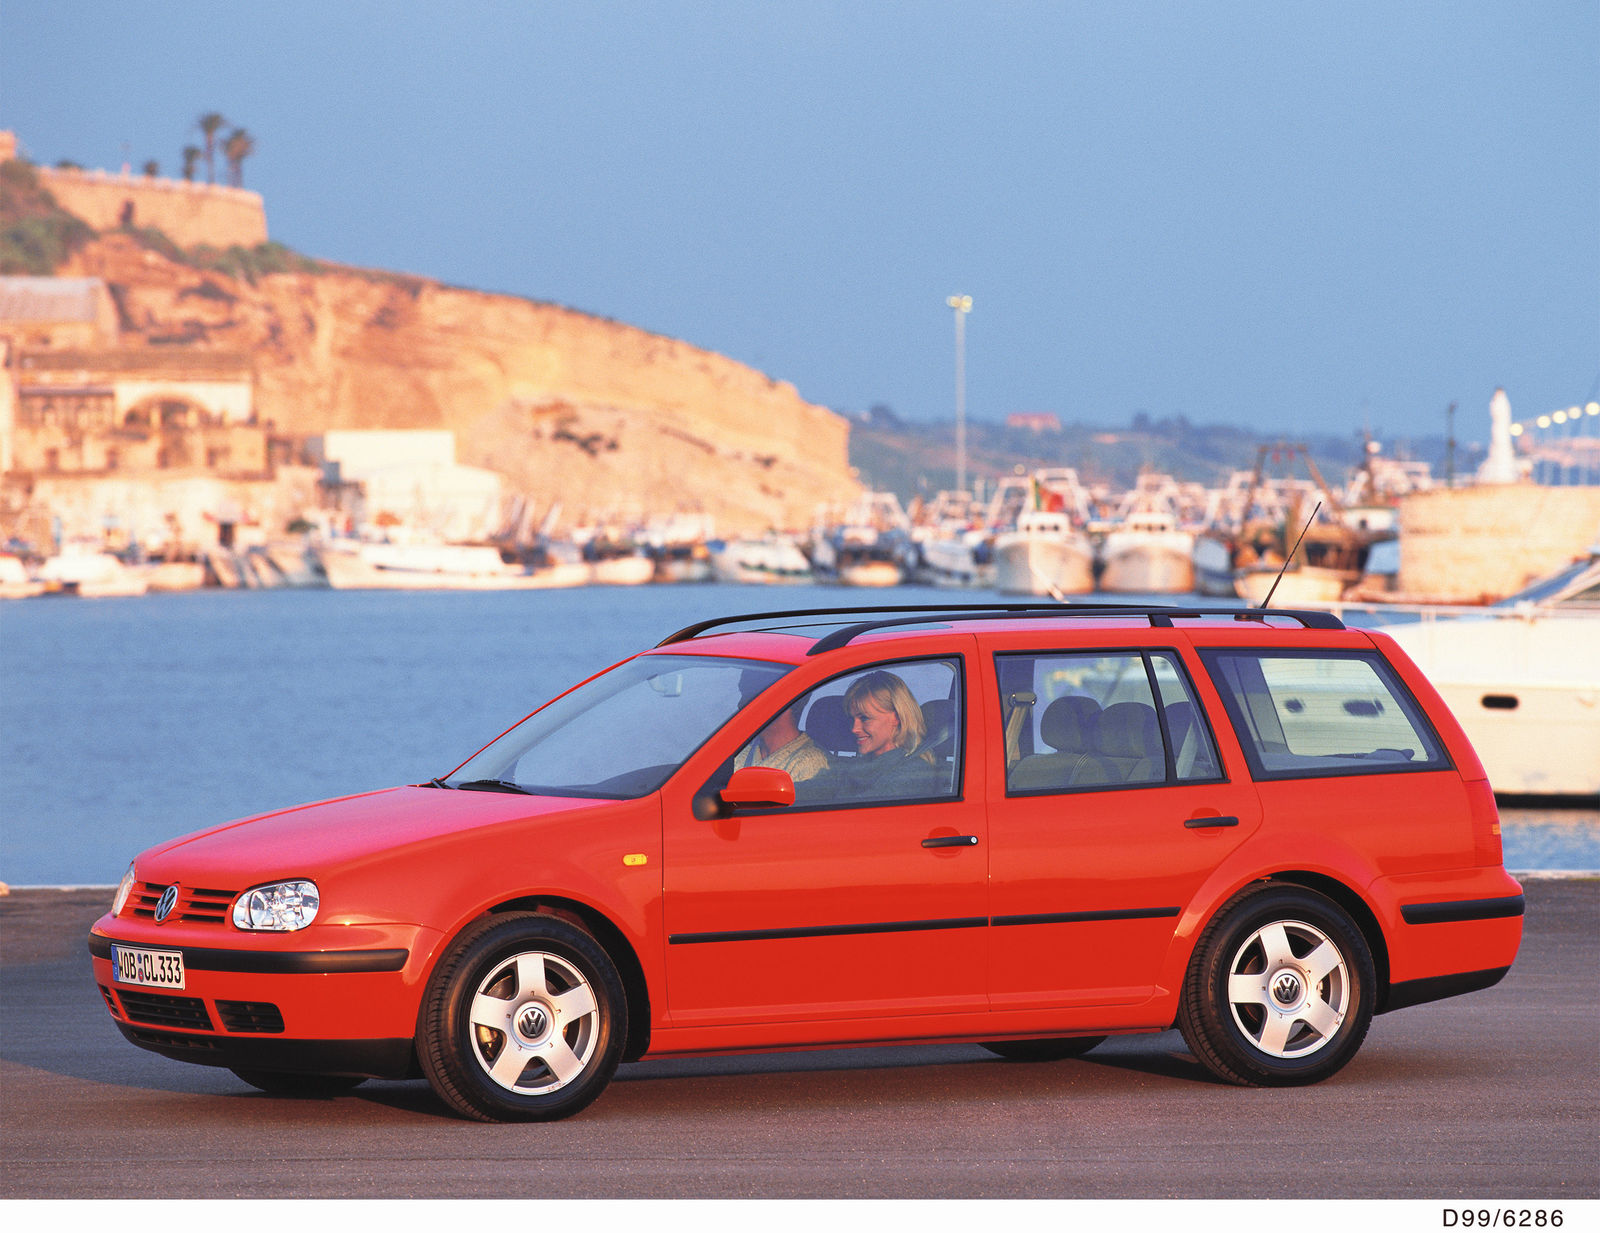 Product: Golf Variant (1999)